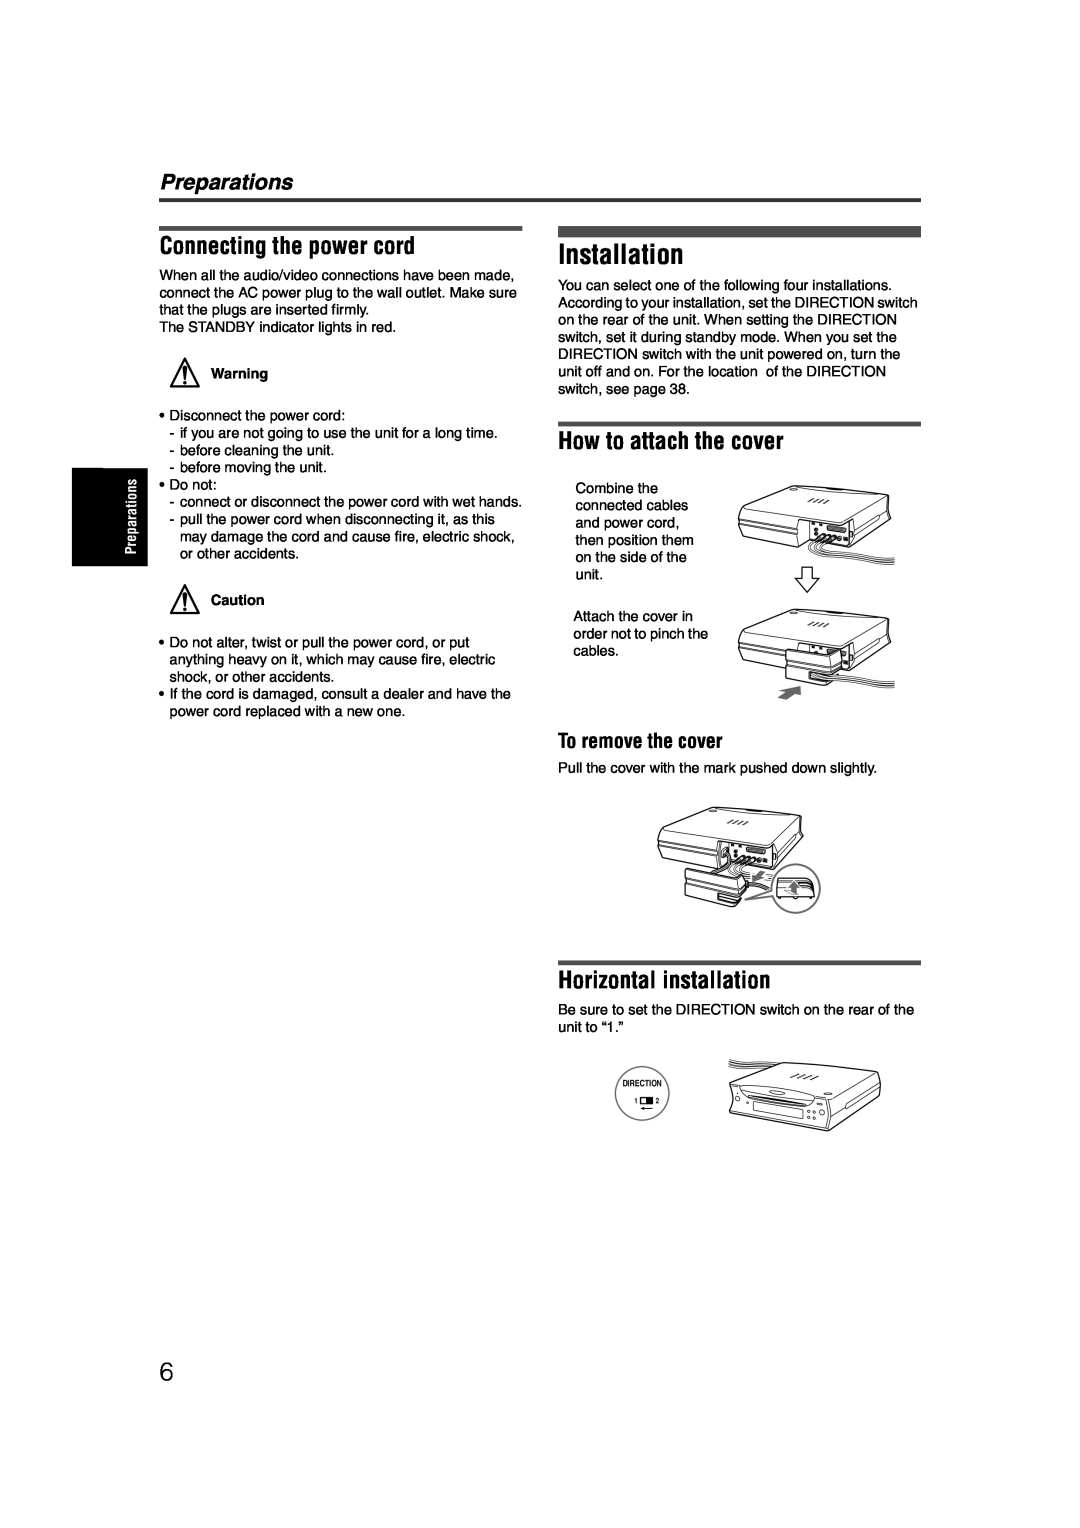 JVC LET0227-003A Installation, Connecting the power cord, How to attach the cover, Horizontal installation, Preparations 